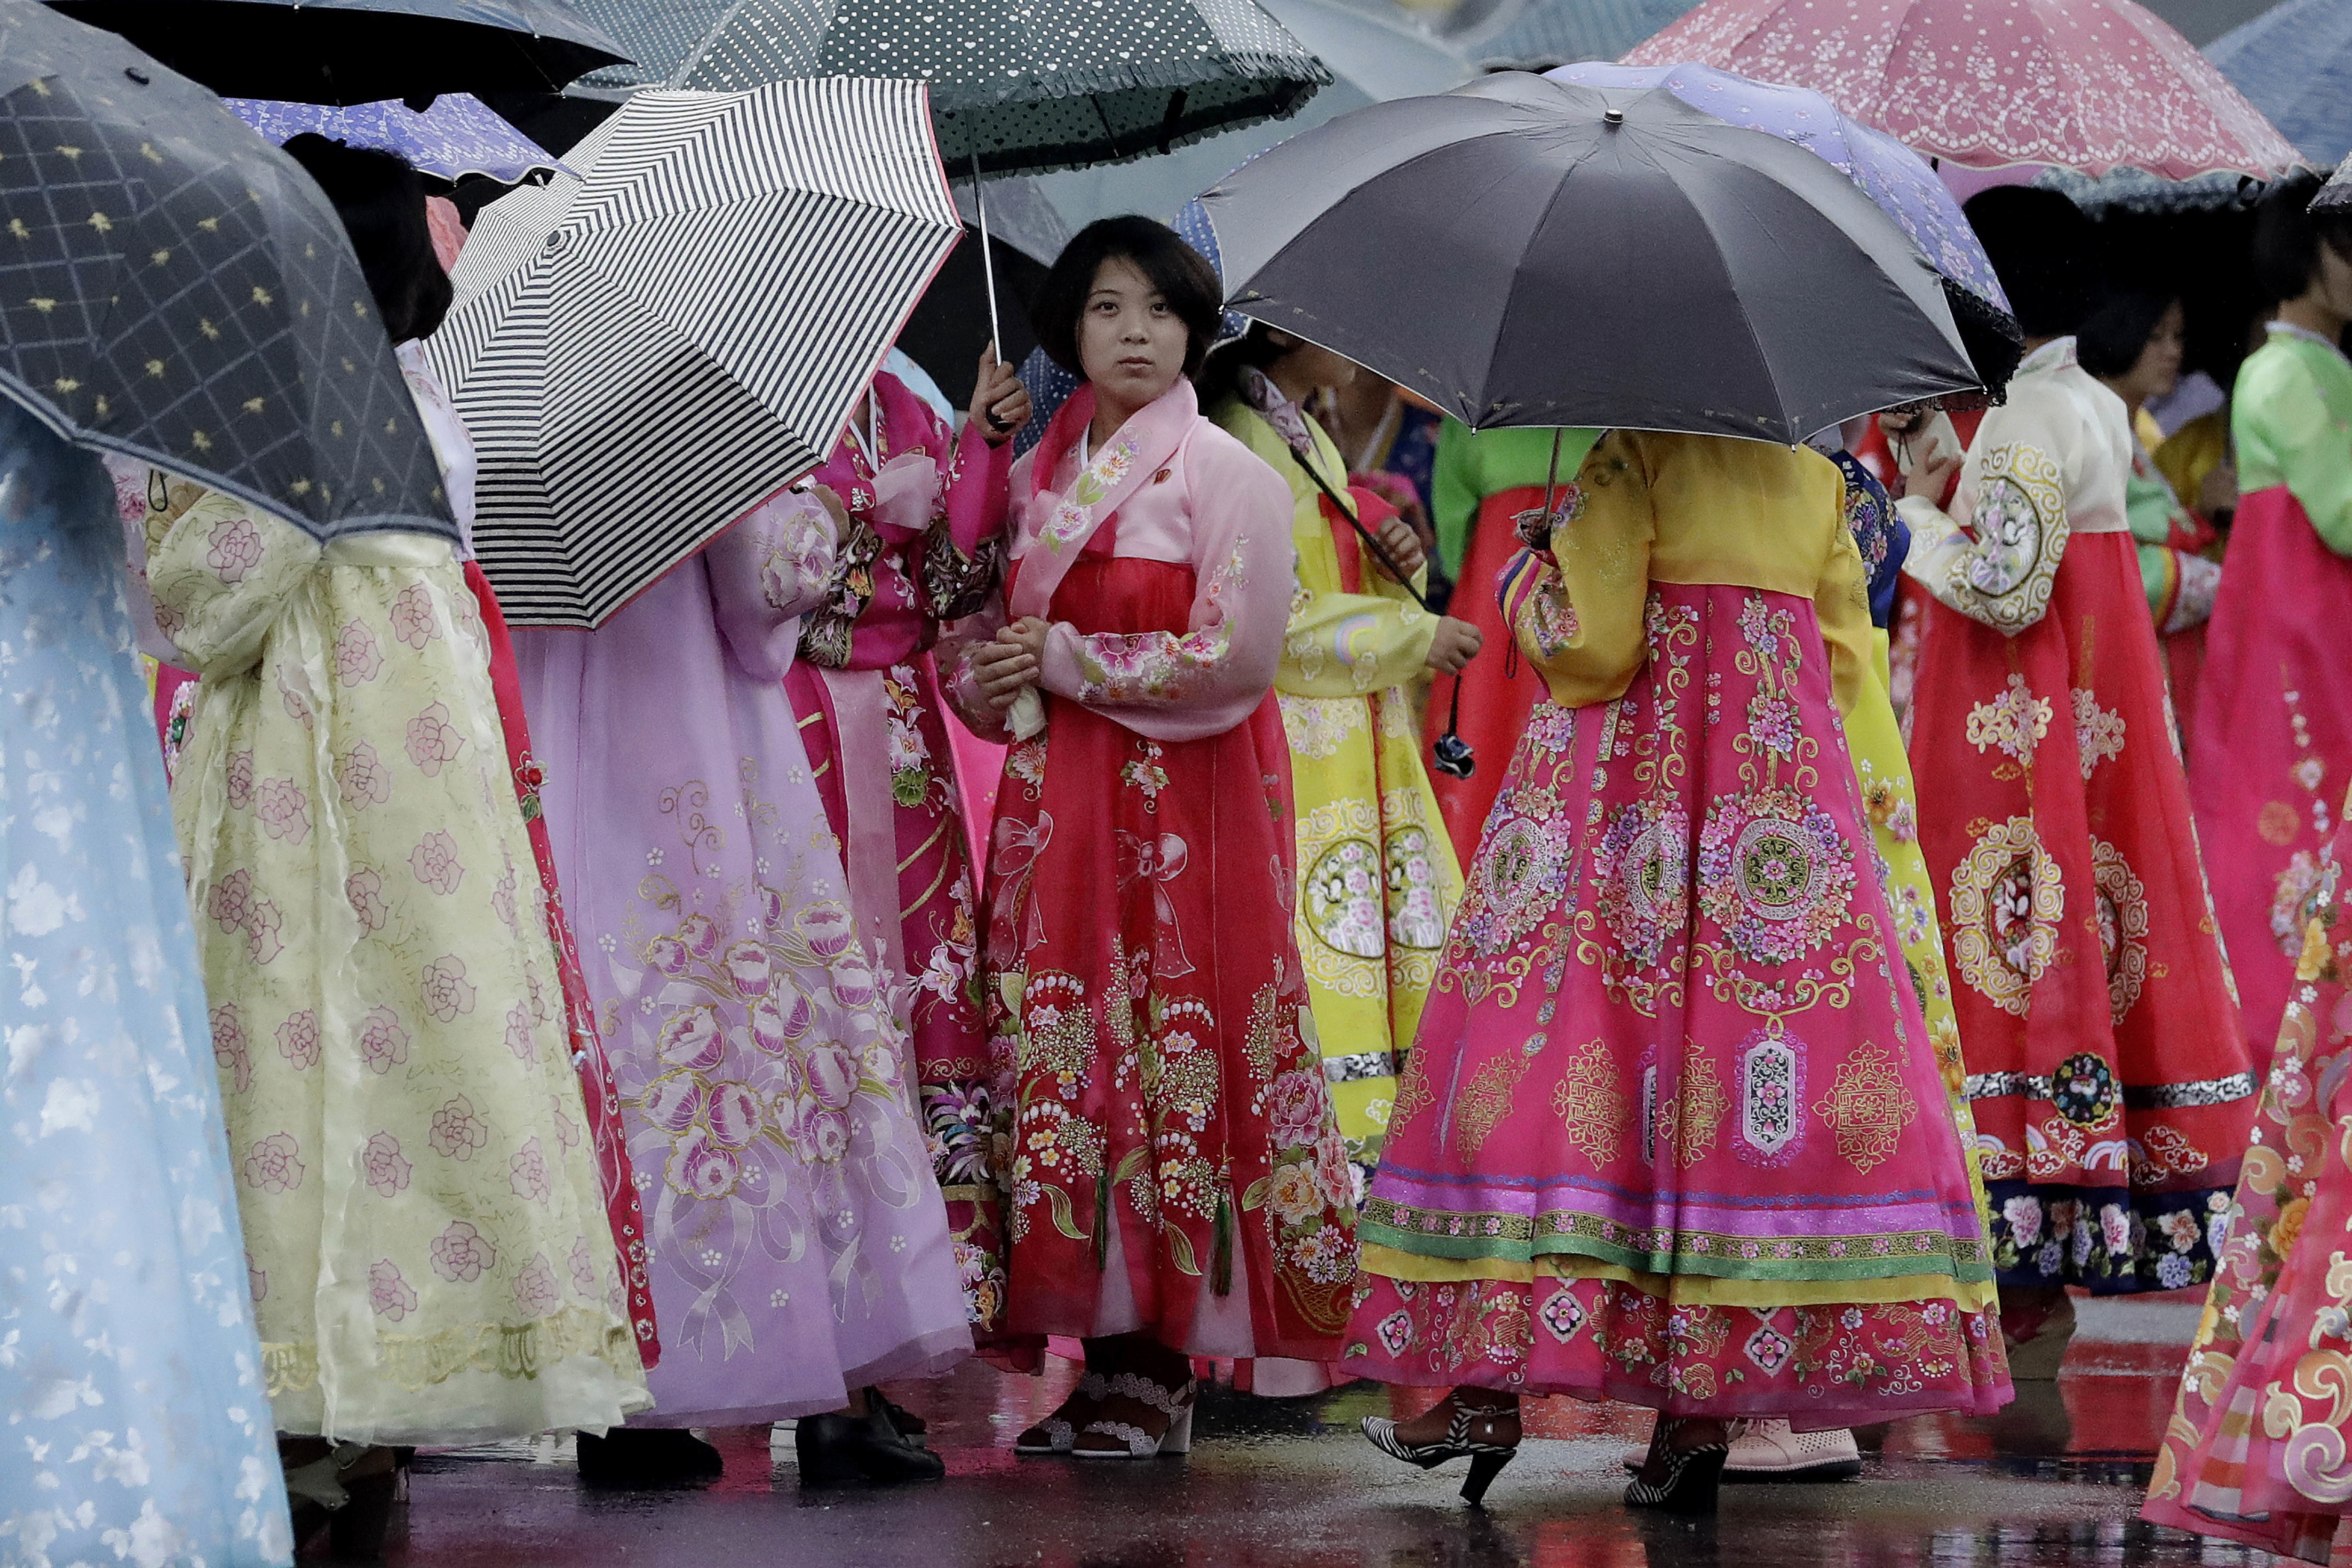 University students wearing traditional Korean dresses wait in the rain for the start of a mass dance on Thursday, July 27, 2017, in Pyongyang, North Korea as part of celebrations for the 64th anniversary of the armistice that ended the Korean War. (AP Photo/Wong Maye-E)